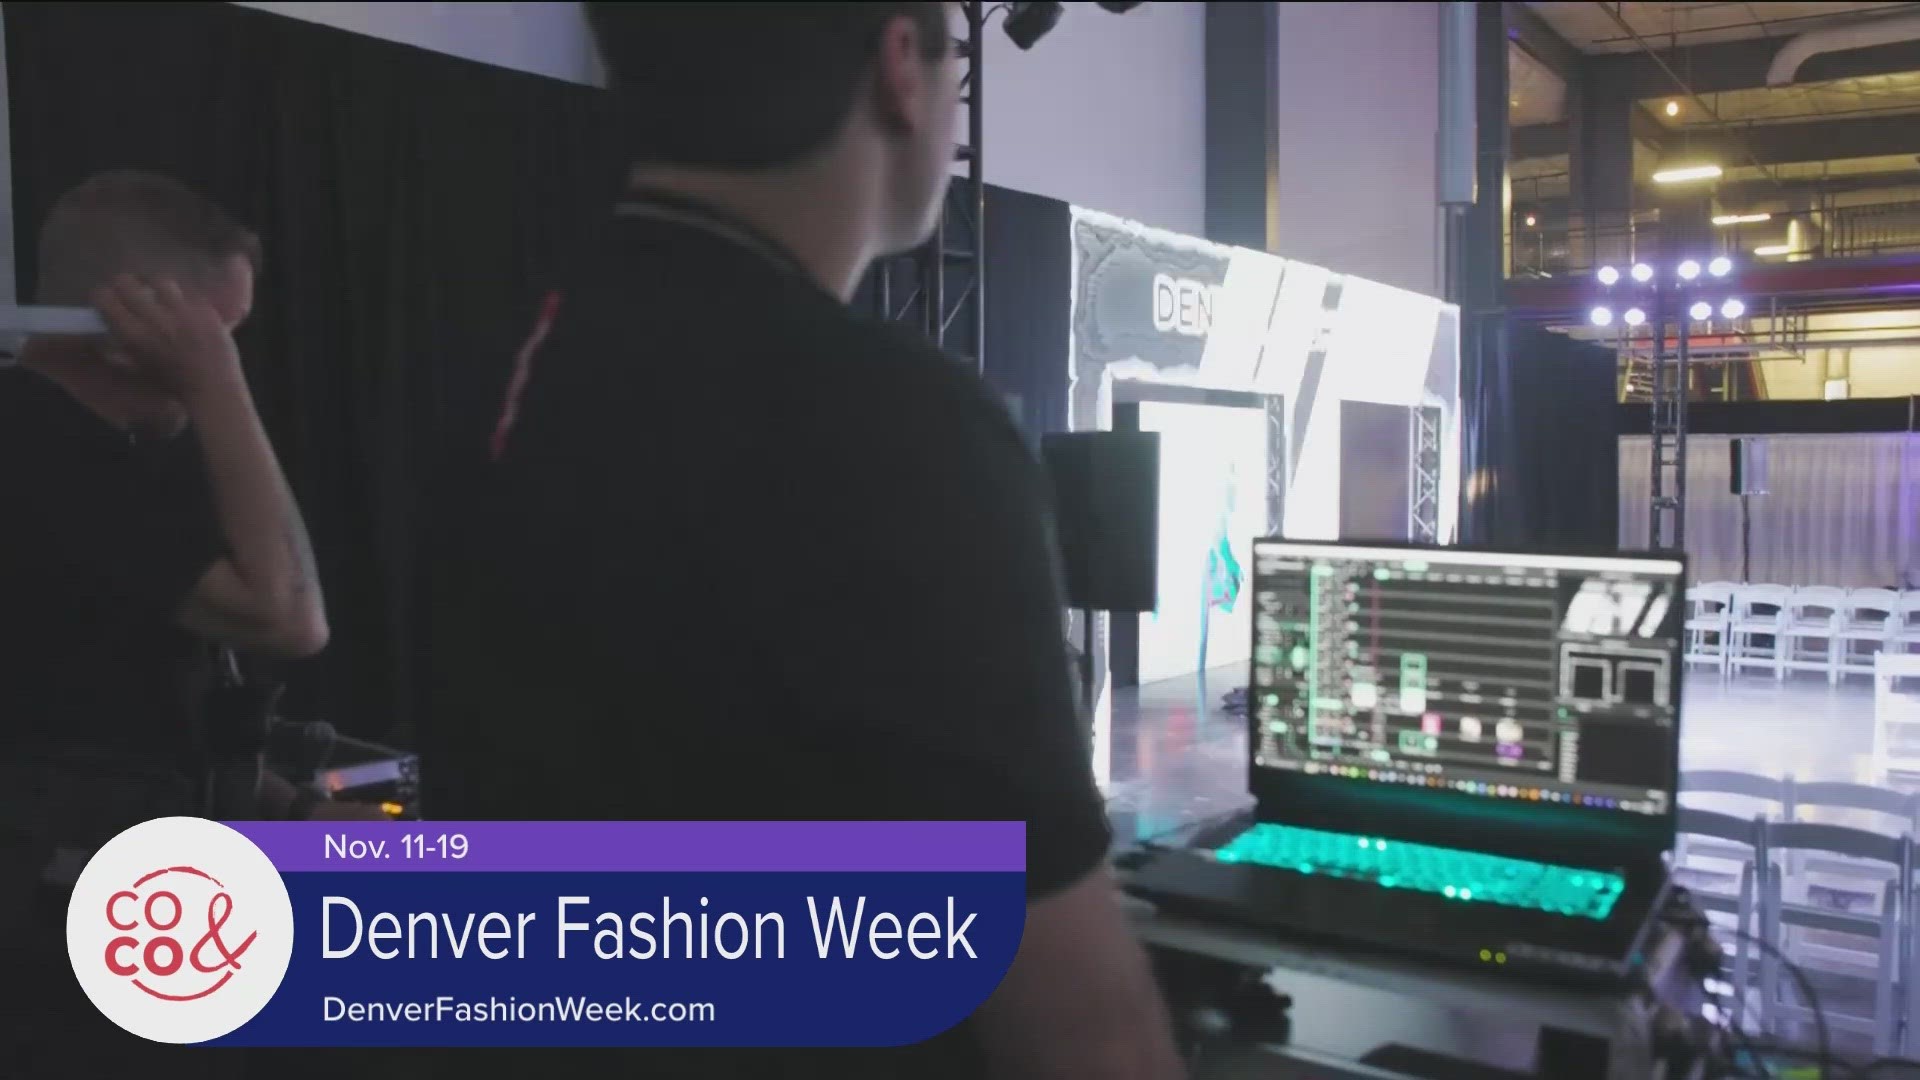 DFW starts this weekend and runs through 11/19. Find a full list of events at DenverFashionWeek.com. **GIVEAWAY CLOSED**